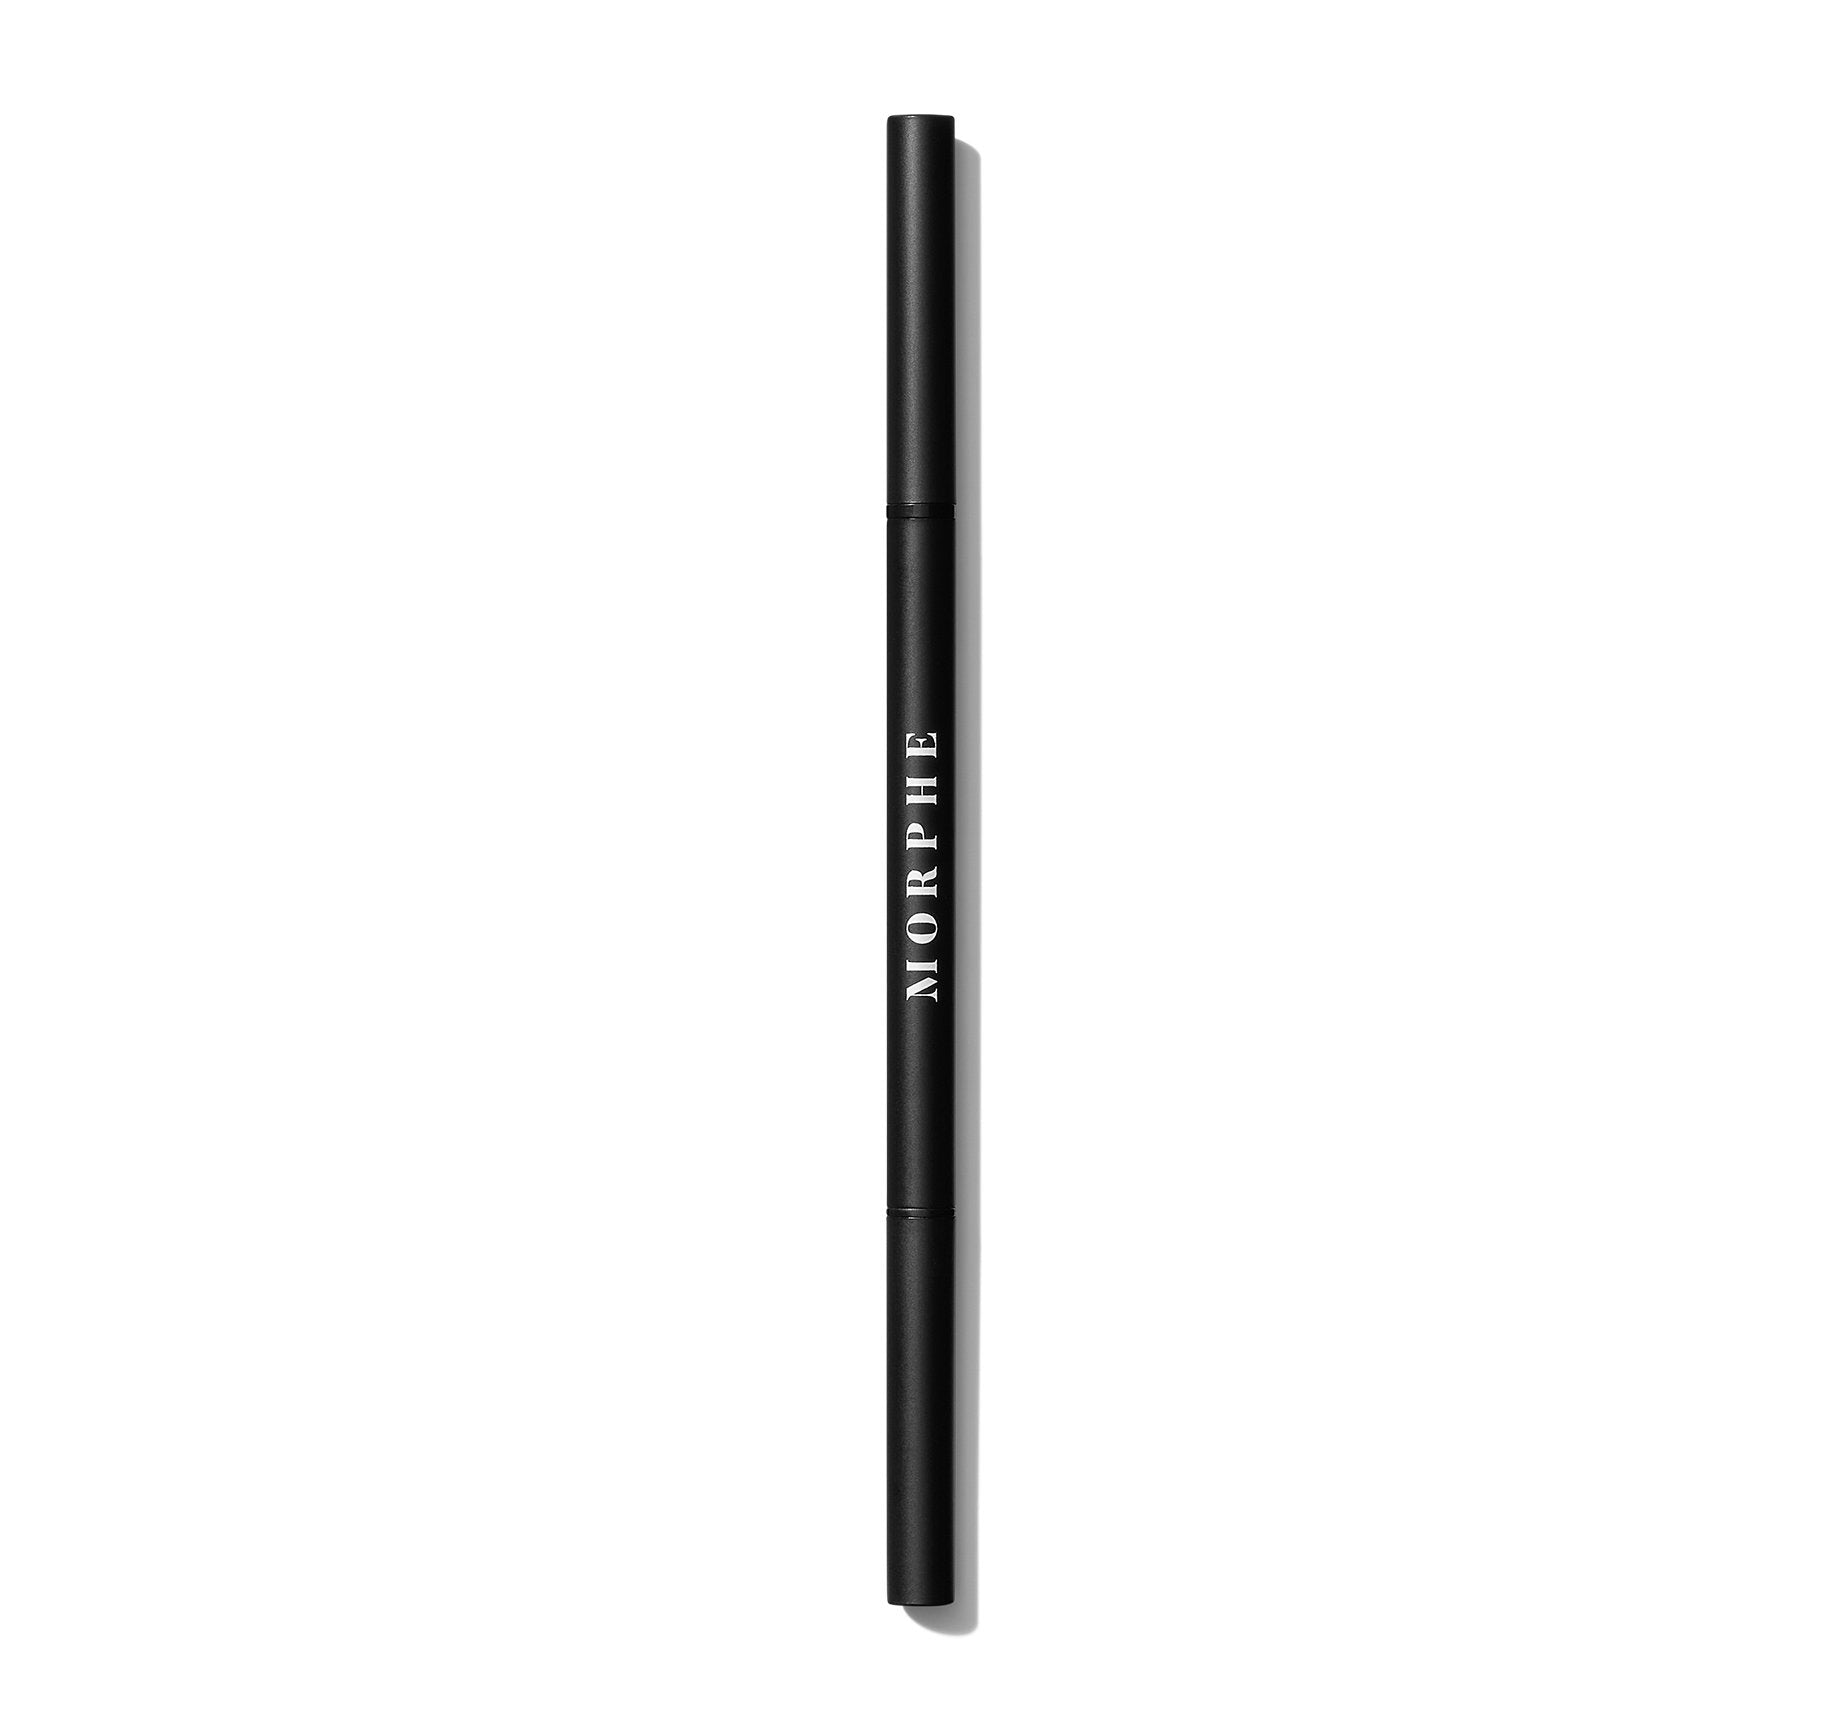 Definer Dual-Ended Brow Pencil & Spoolie - Almond - Image 9